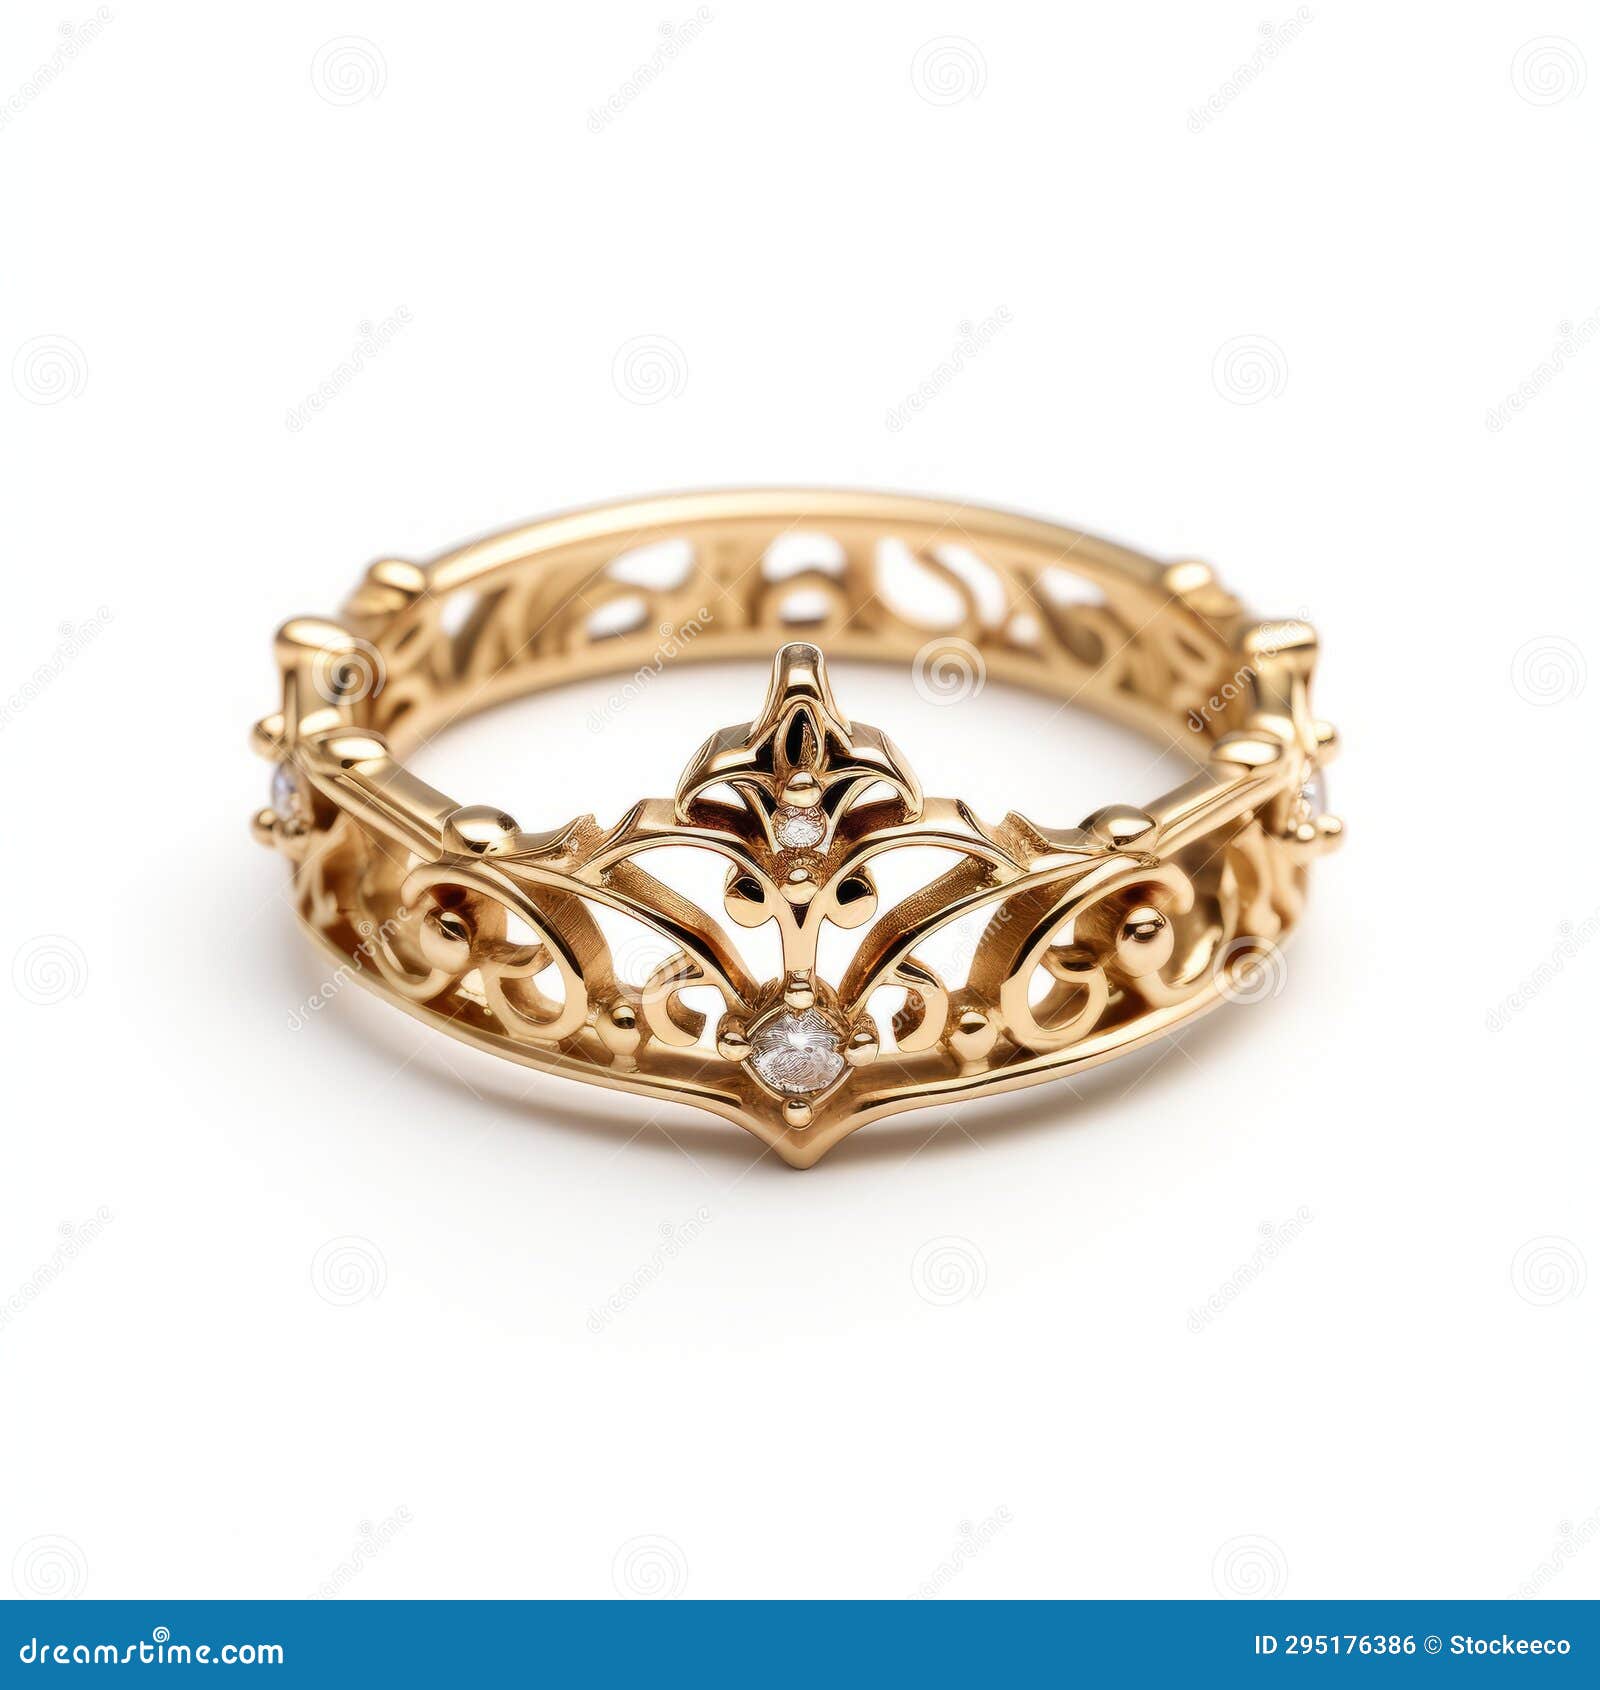 Buy Dainty Gold Crown Ring, Gold Princess Crown Ring, Gold Princess Ring,  Gold Tiara Ring, Gold Queen Ring, Gold Ring, Gold Crown Ring, Gold Online  in India - Etsy